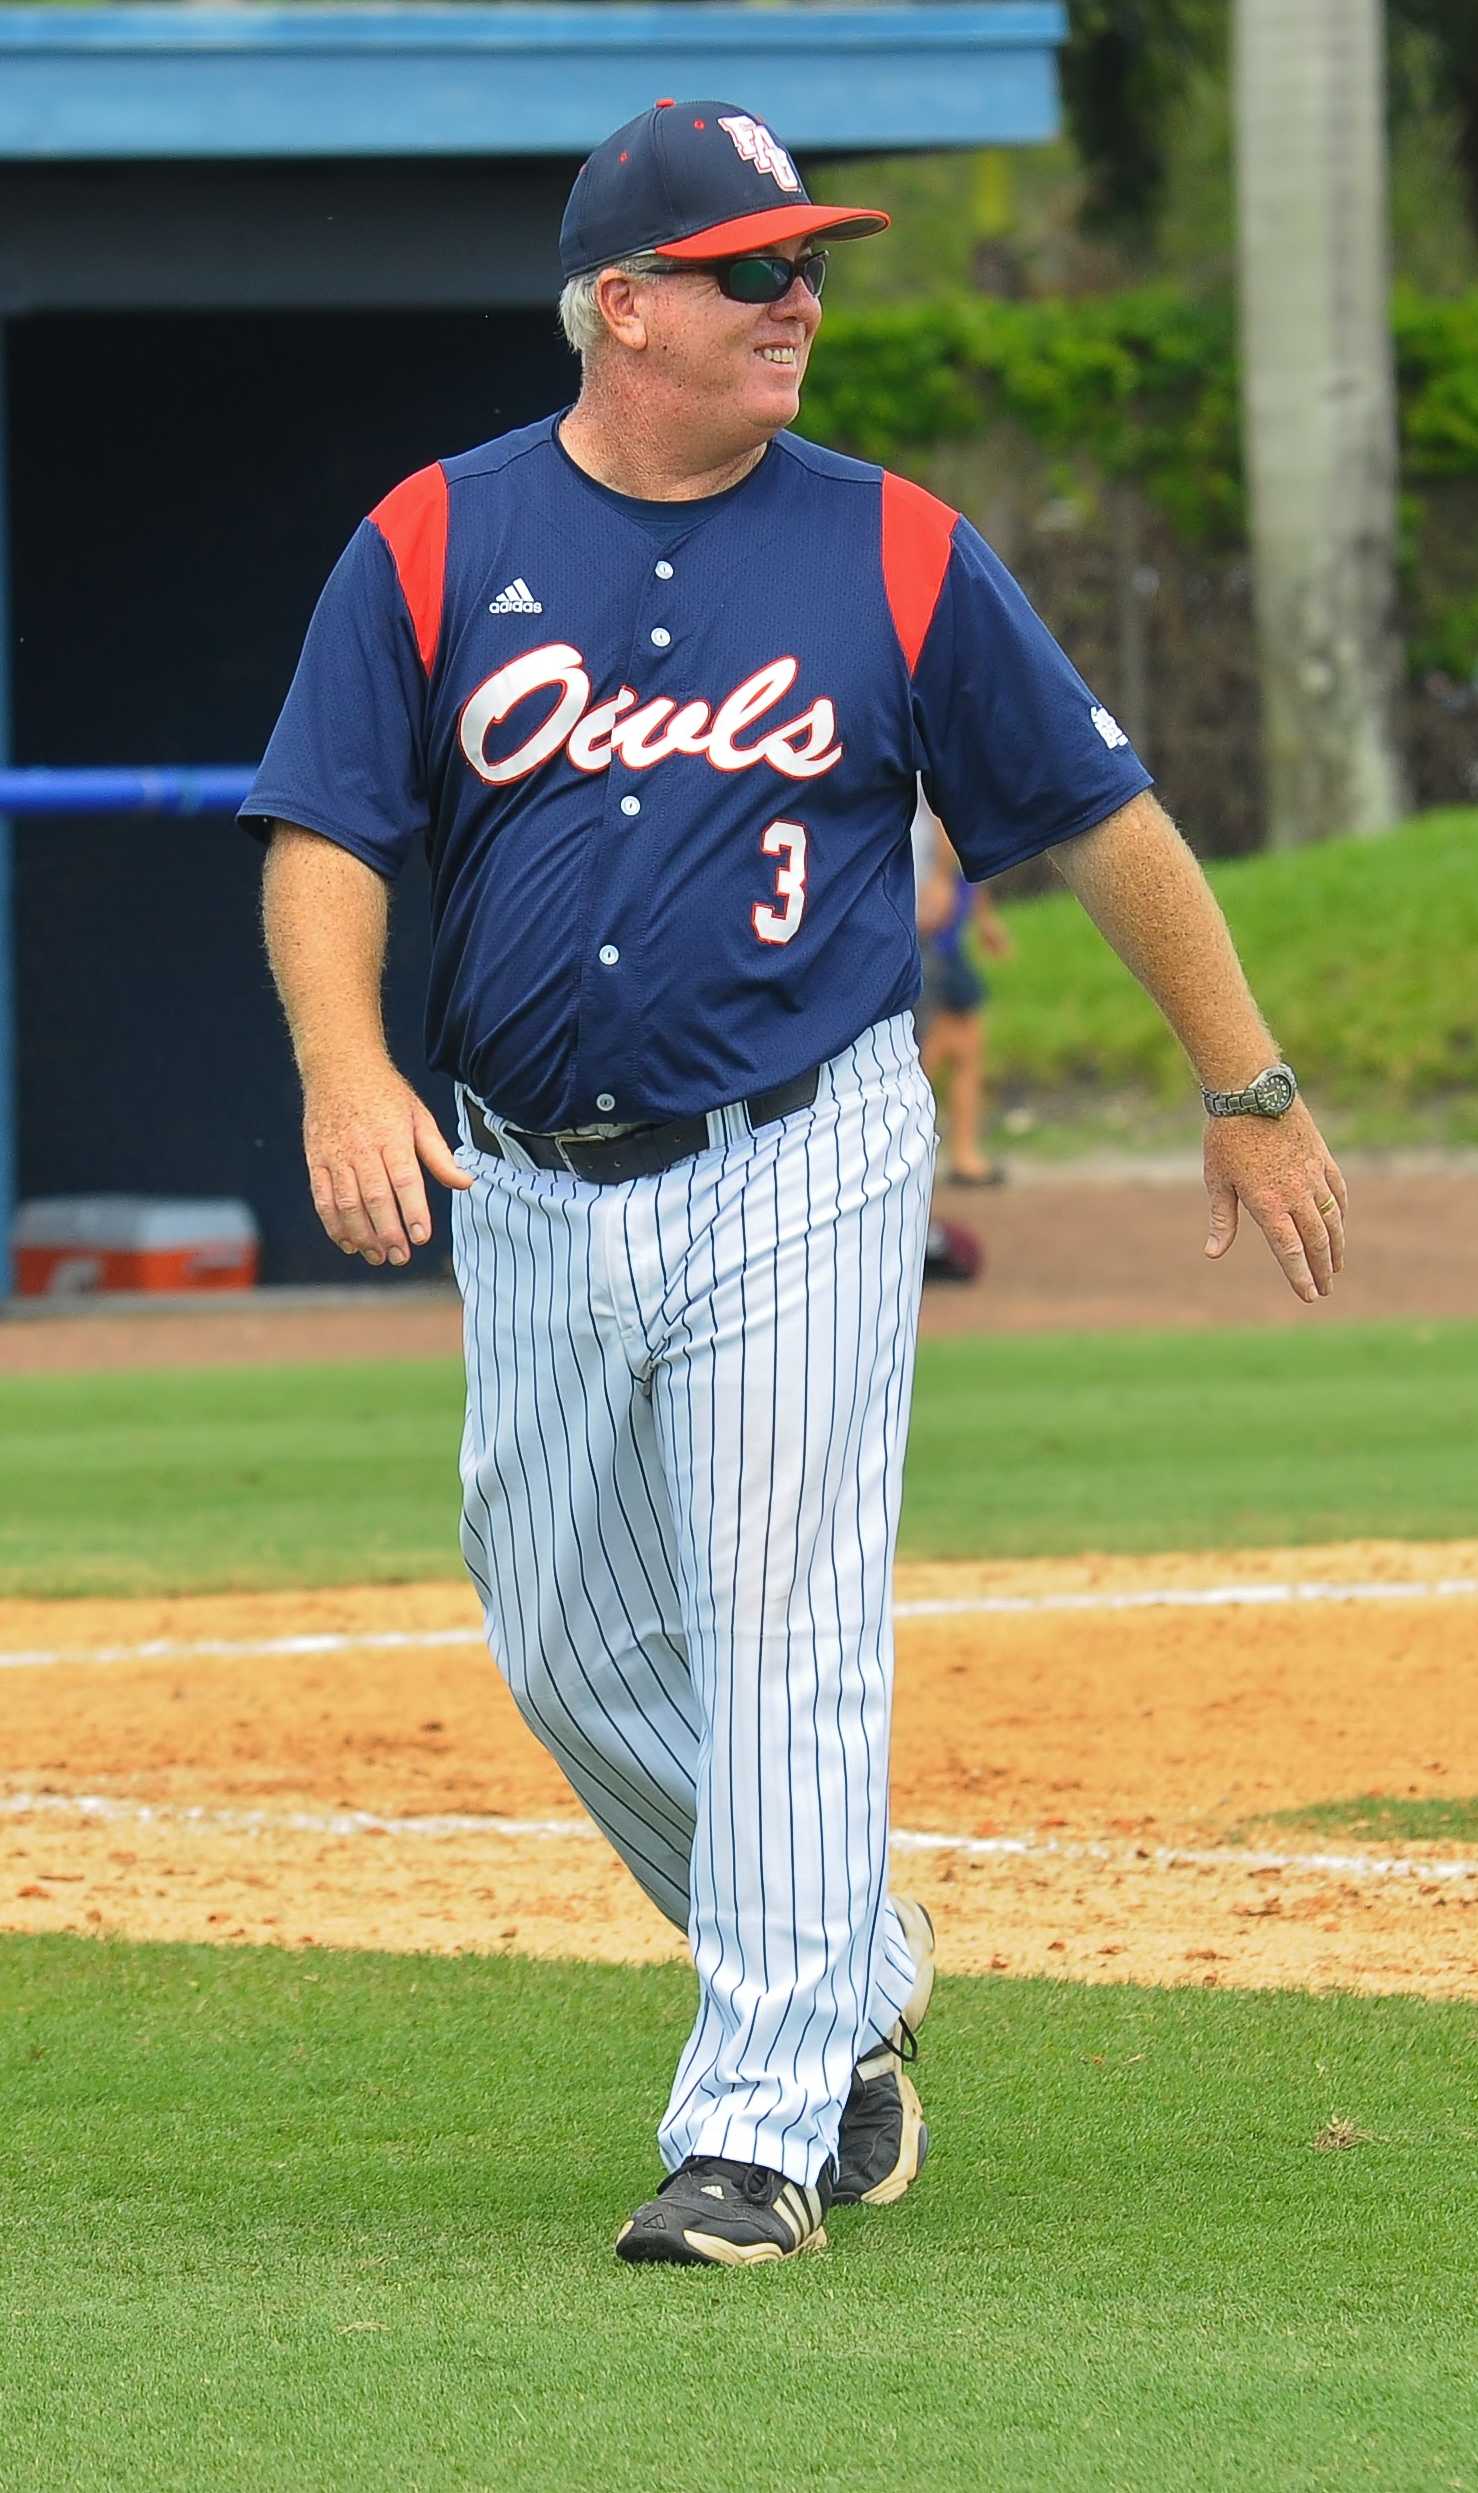 FAU baseball aims to repeat its success after losing players and